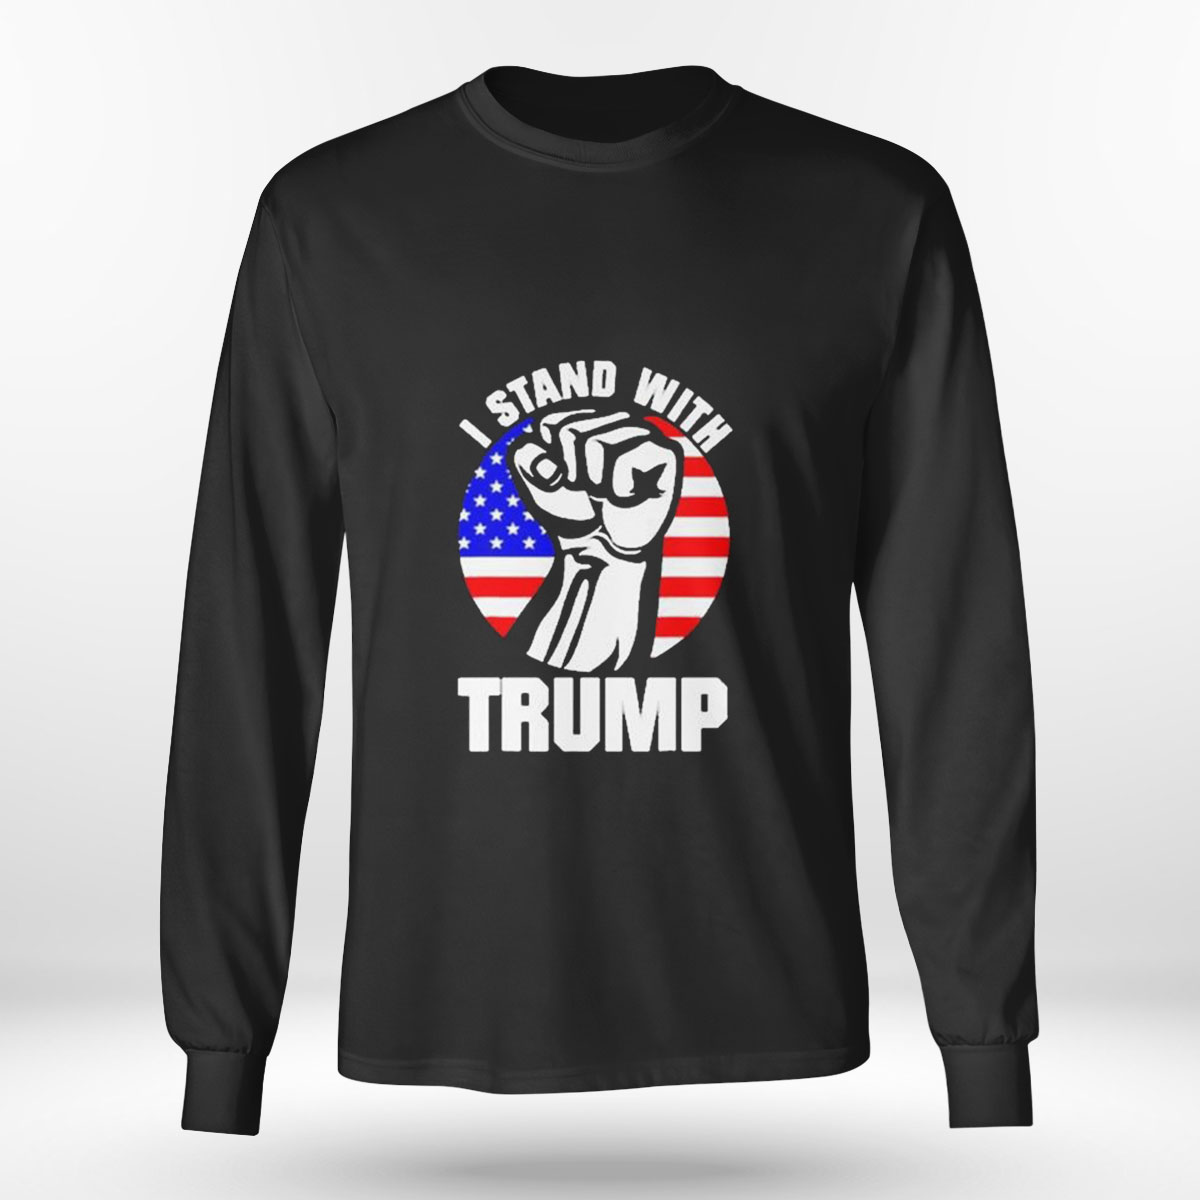 If You Dont Like Trump Then You Probably Wont Like Me And Im Ok With That T-shirt